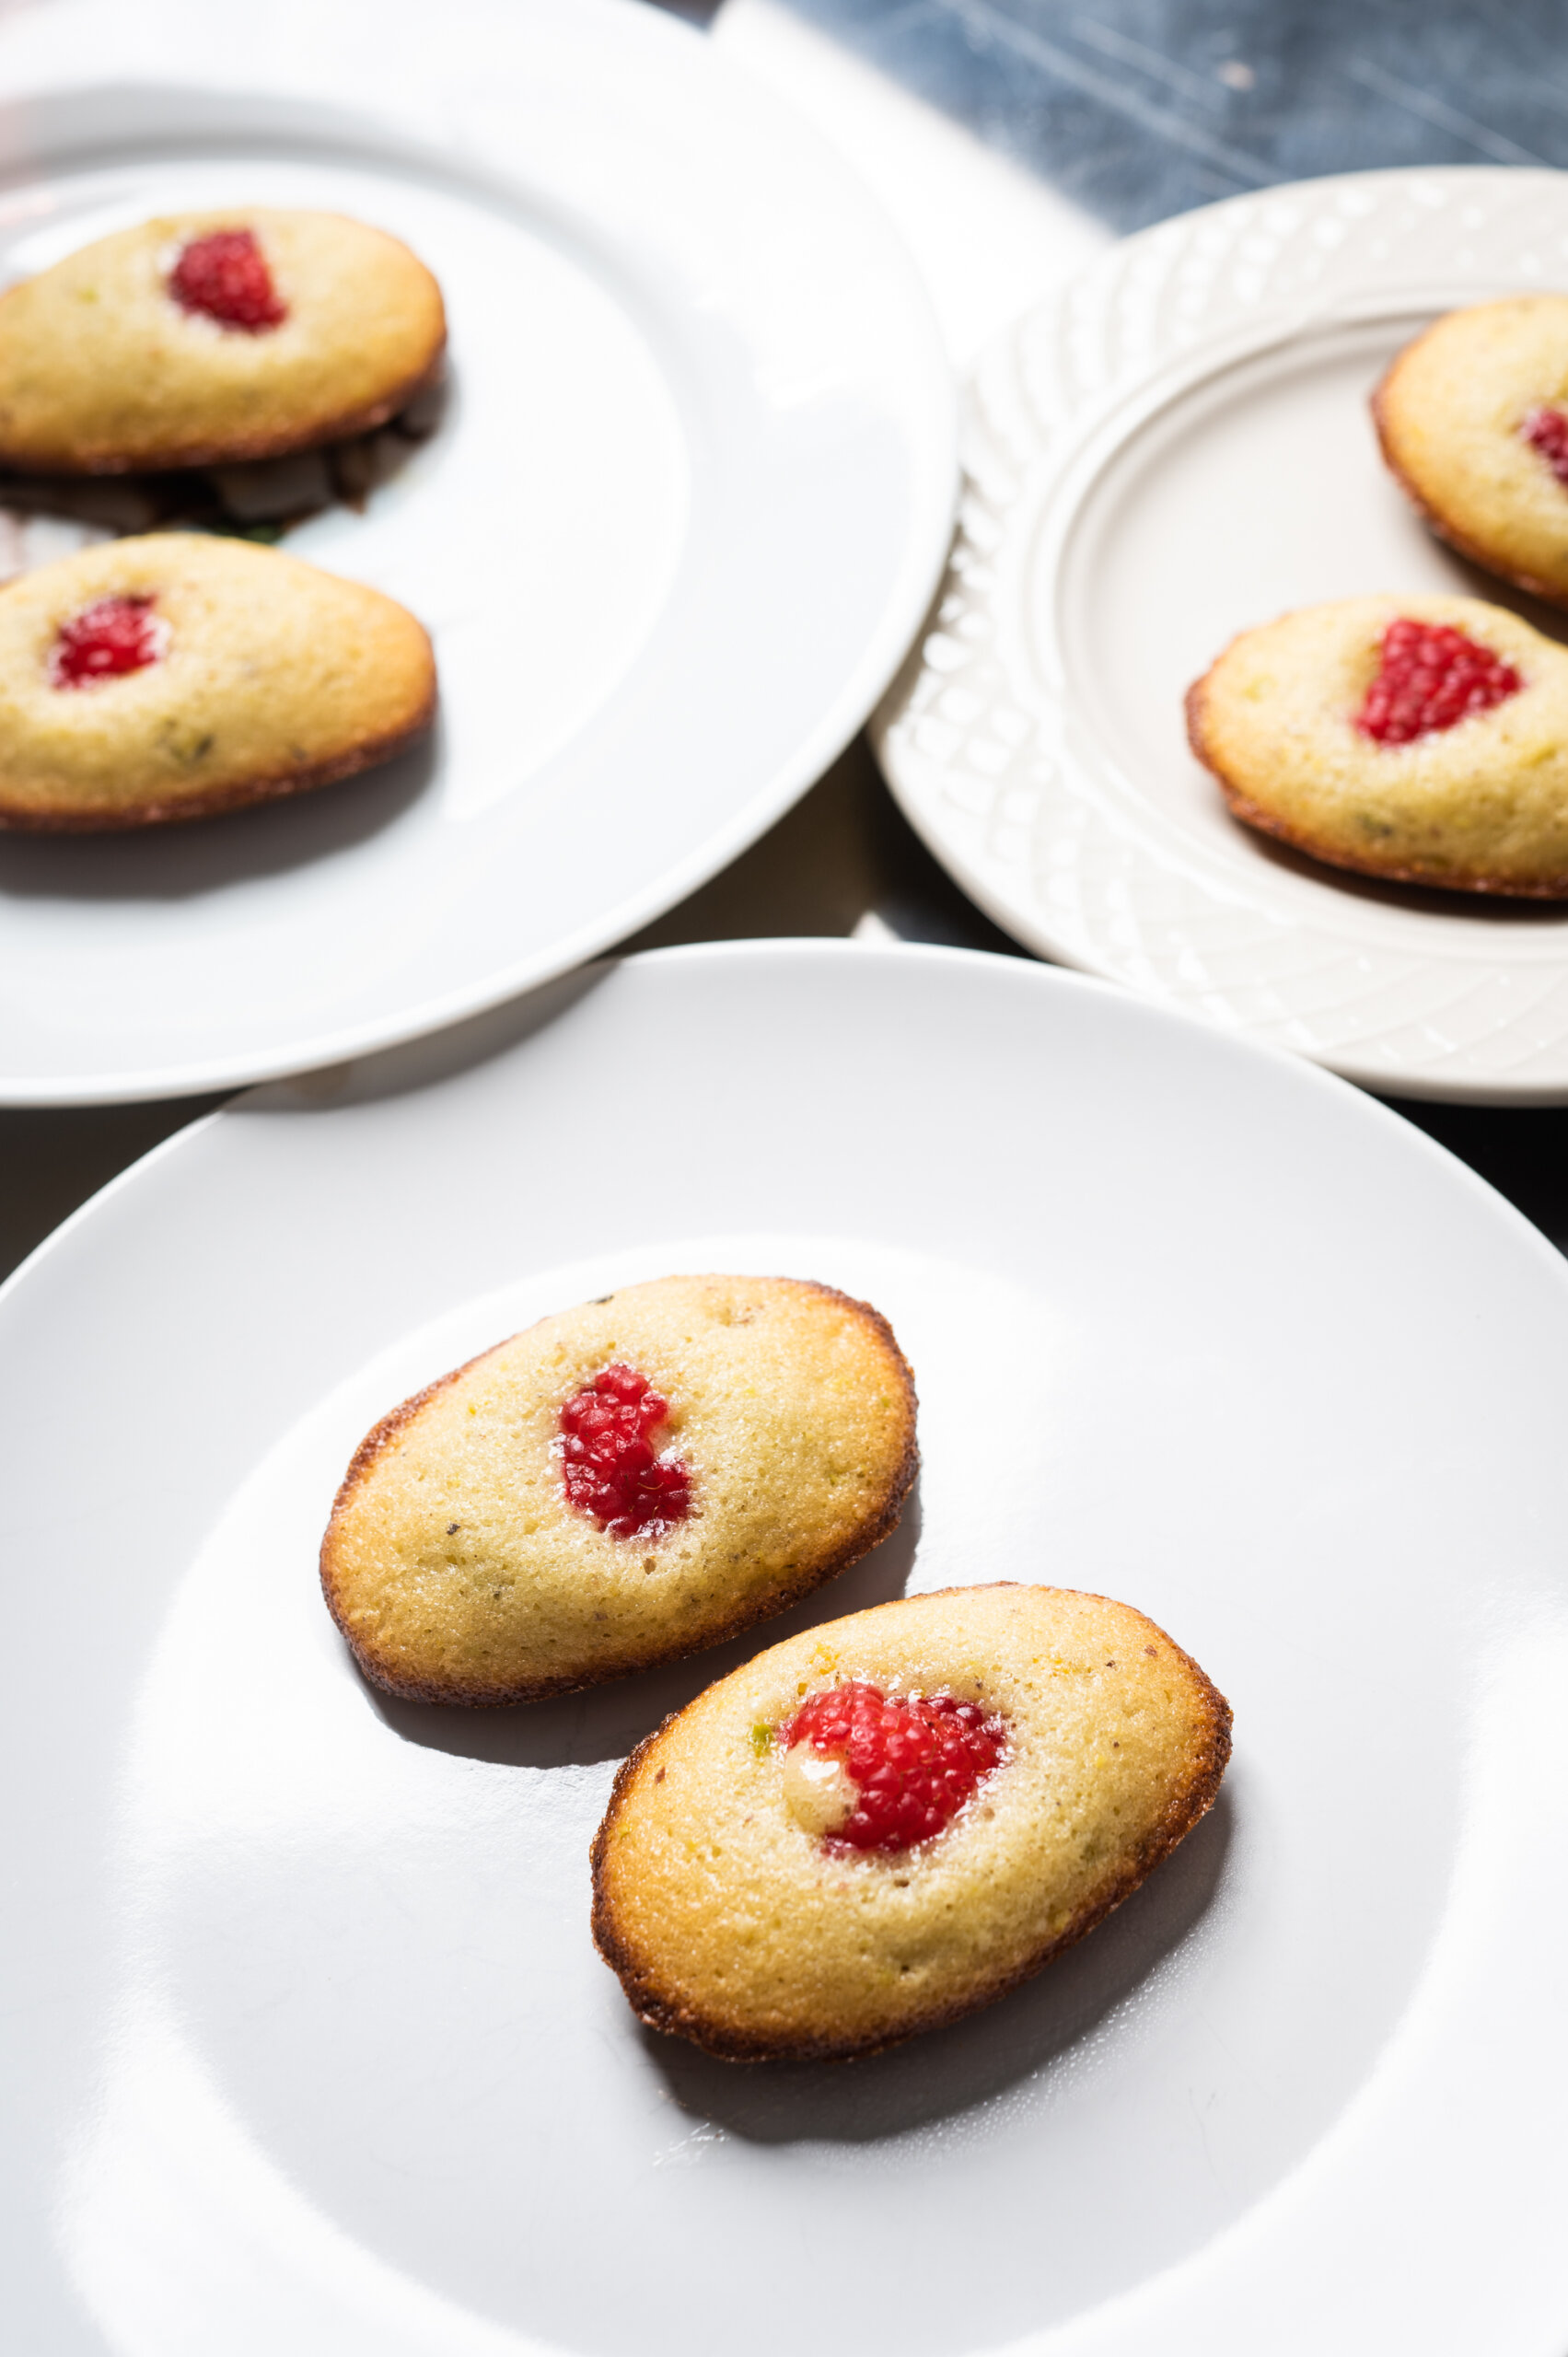 Pistachio madeleines with fresh raspberries to end the meal